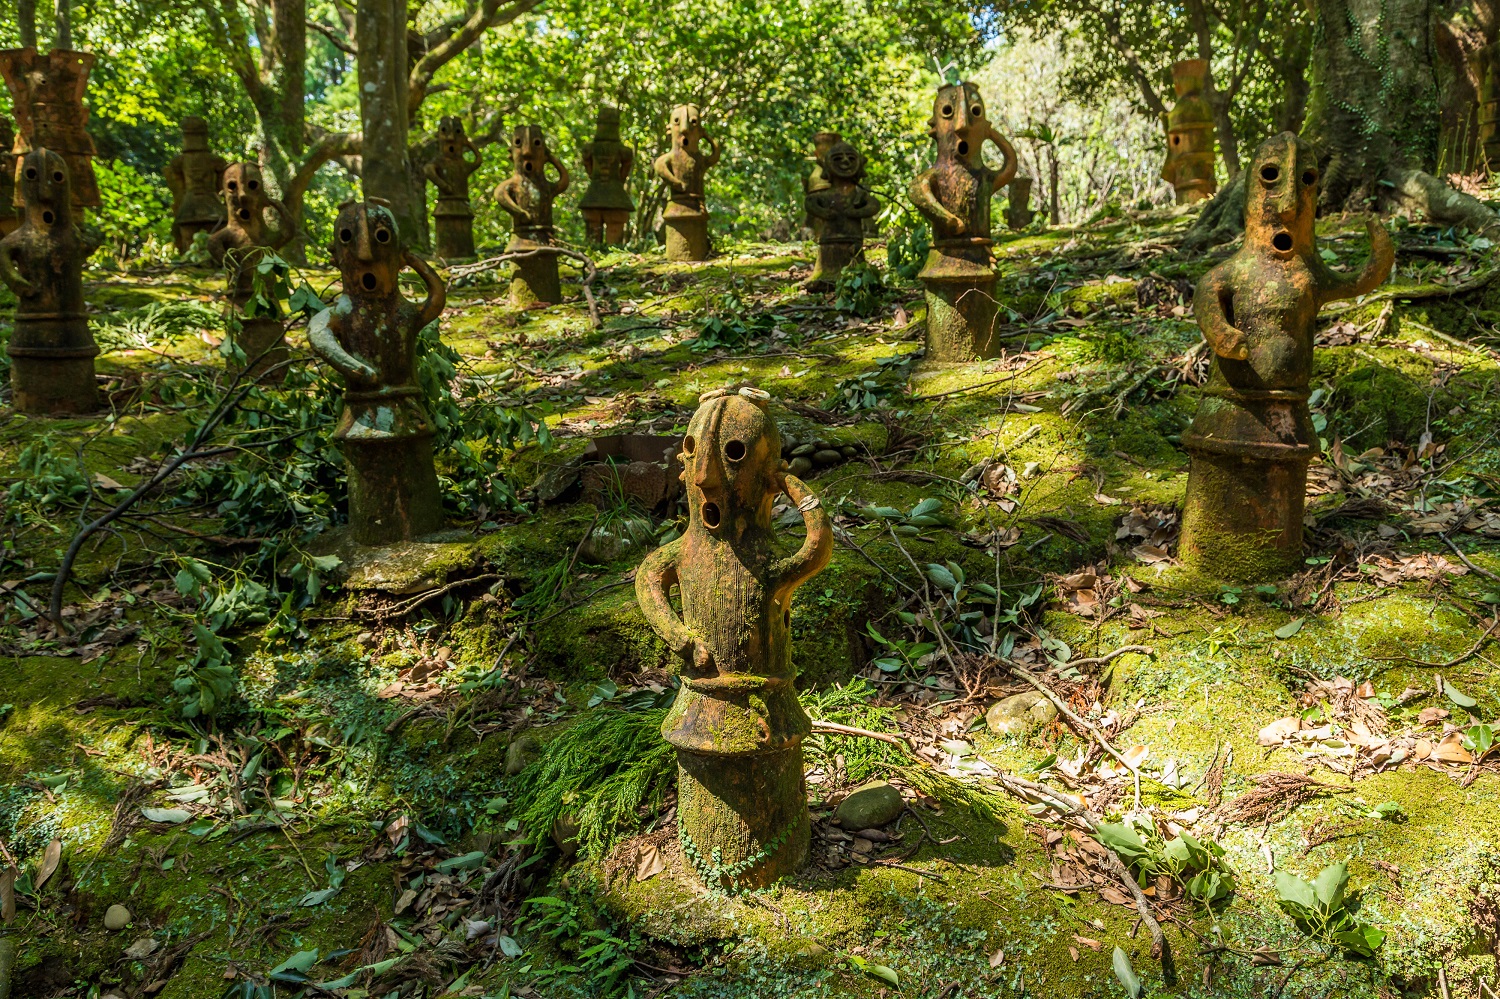 Haniwa statues in video games feature by DigitallyDownloaded.net